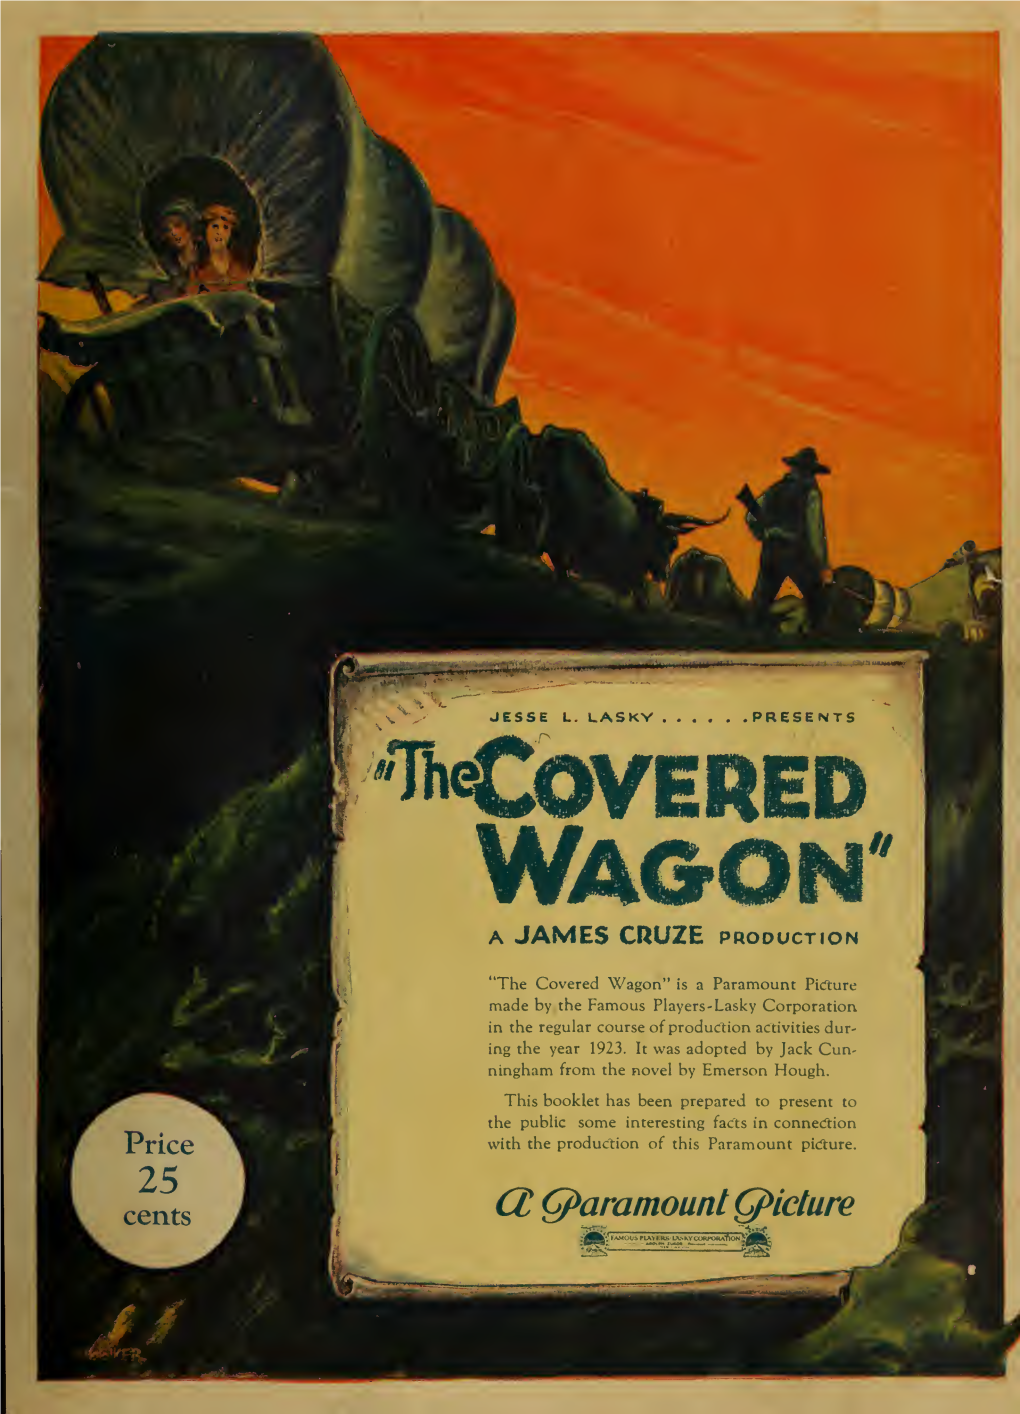 The Covered Wagon" Is a Paramount Picture Made by the Famous Players -Lasky Corporation in the Regular Course of Production Activities Dur- Ing the Year 1923